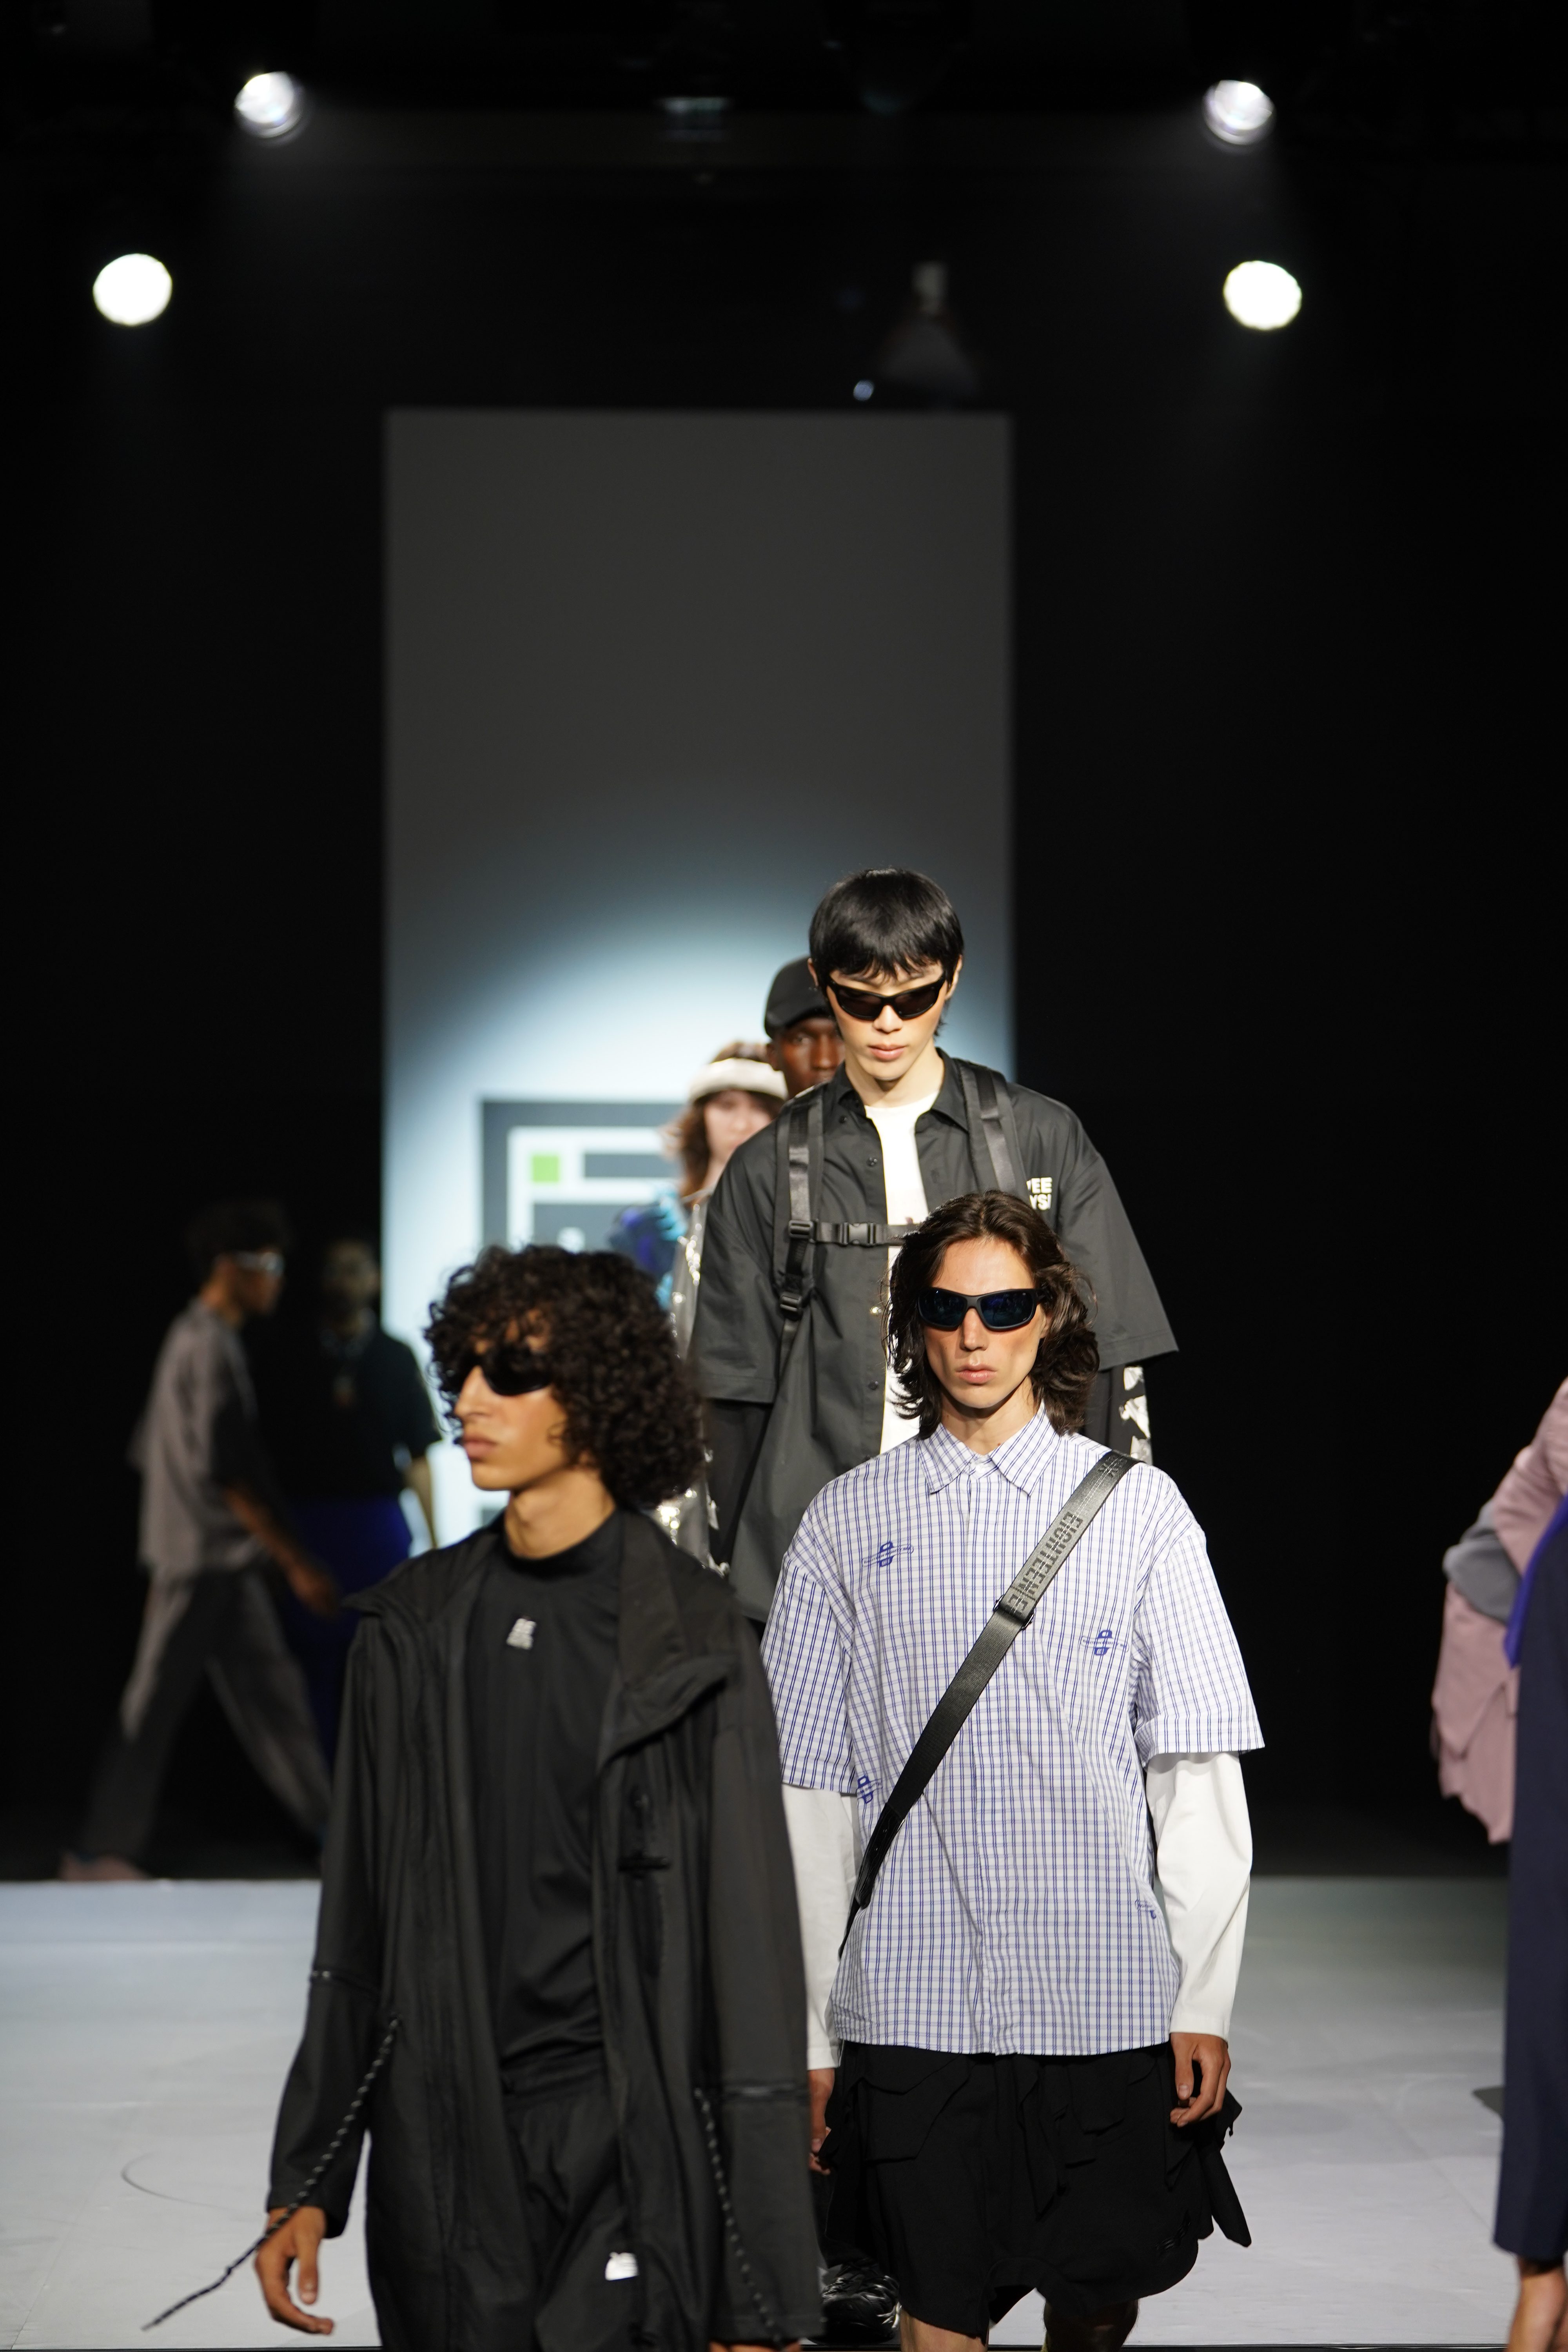 The first Fashion Week in Saudi announced